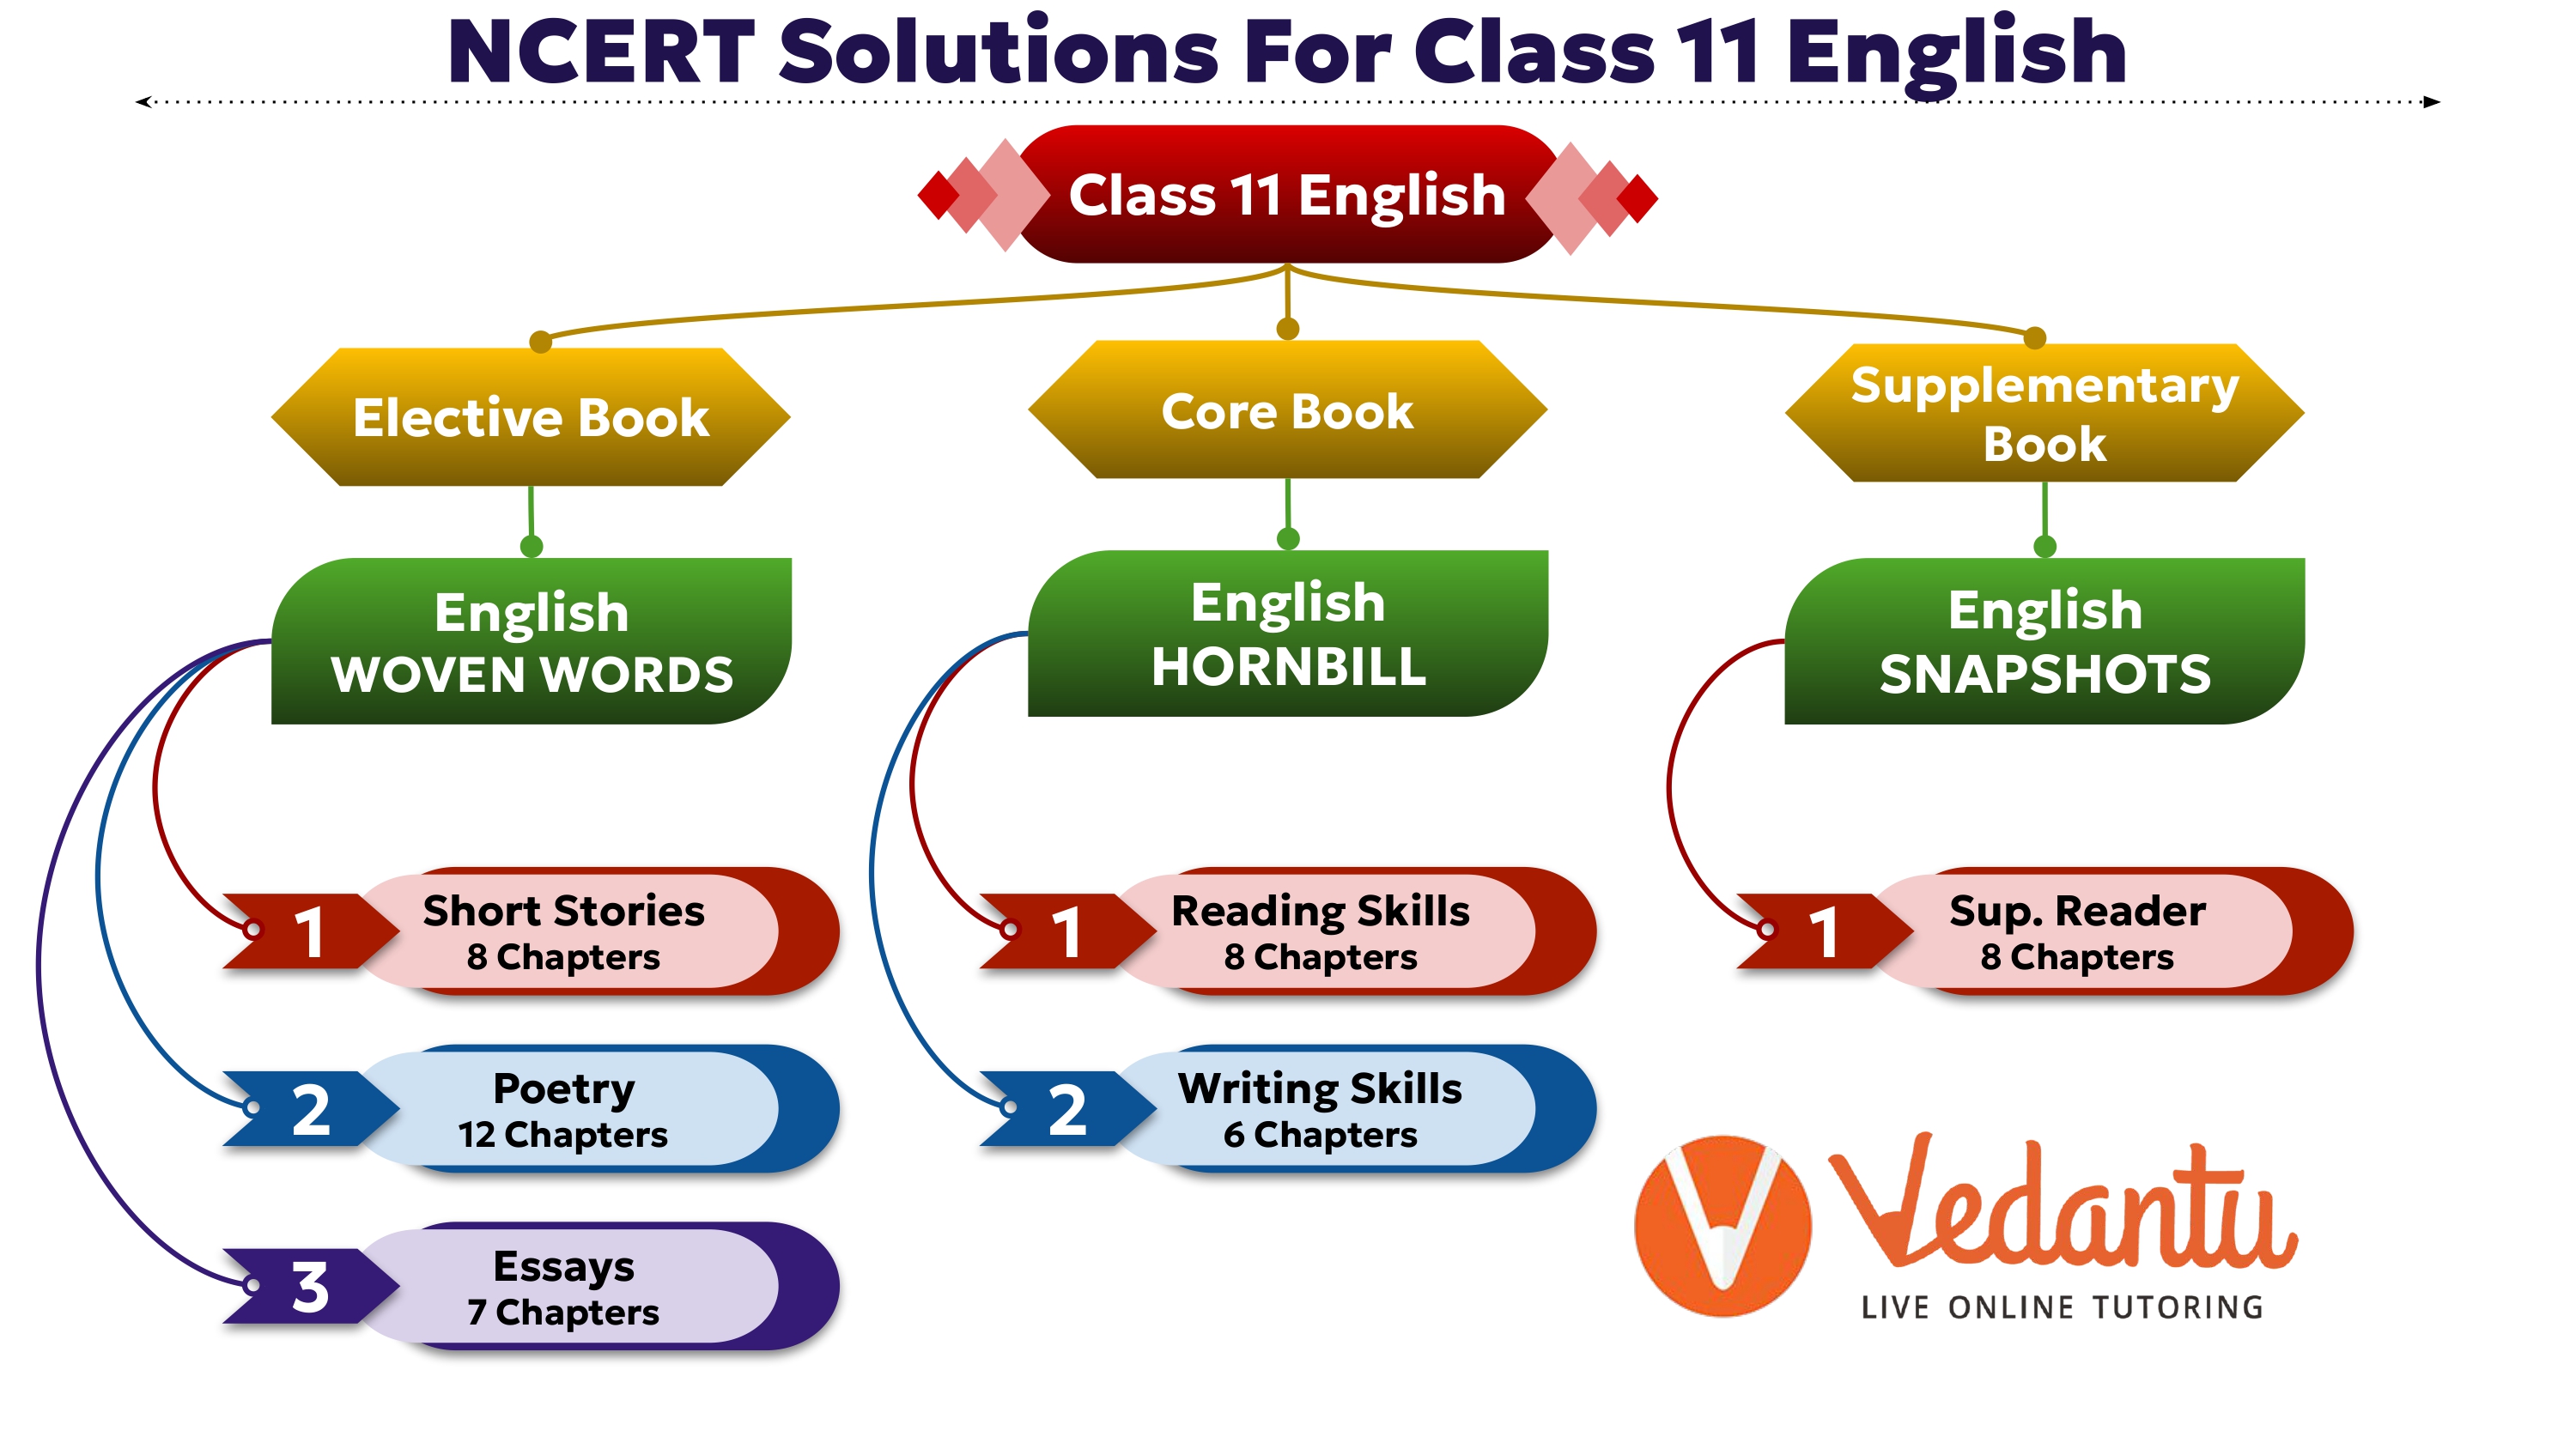 NCERT Solutions for Class 11 English - Chapter-wise Overview